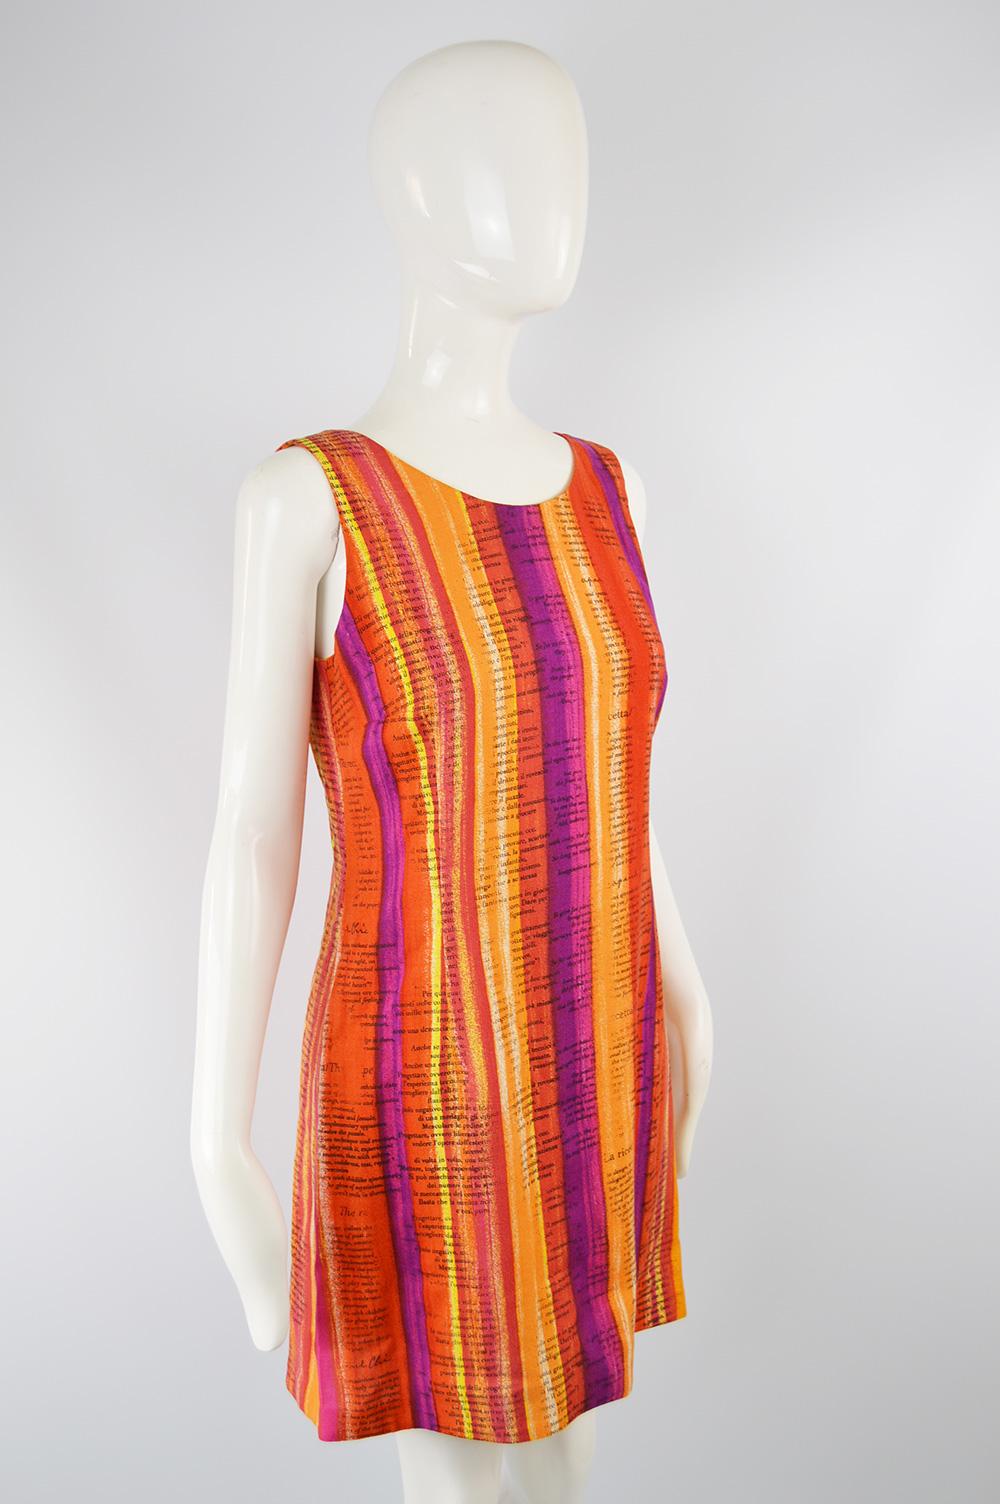 Moschino Cheap & Chic 'Recipe' Watercolor Stripe Print Rayon Dress, 1997 In Excellent Condition In Doncaster, South Yorkshire